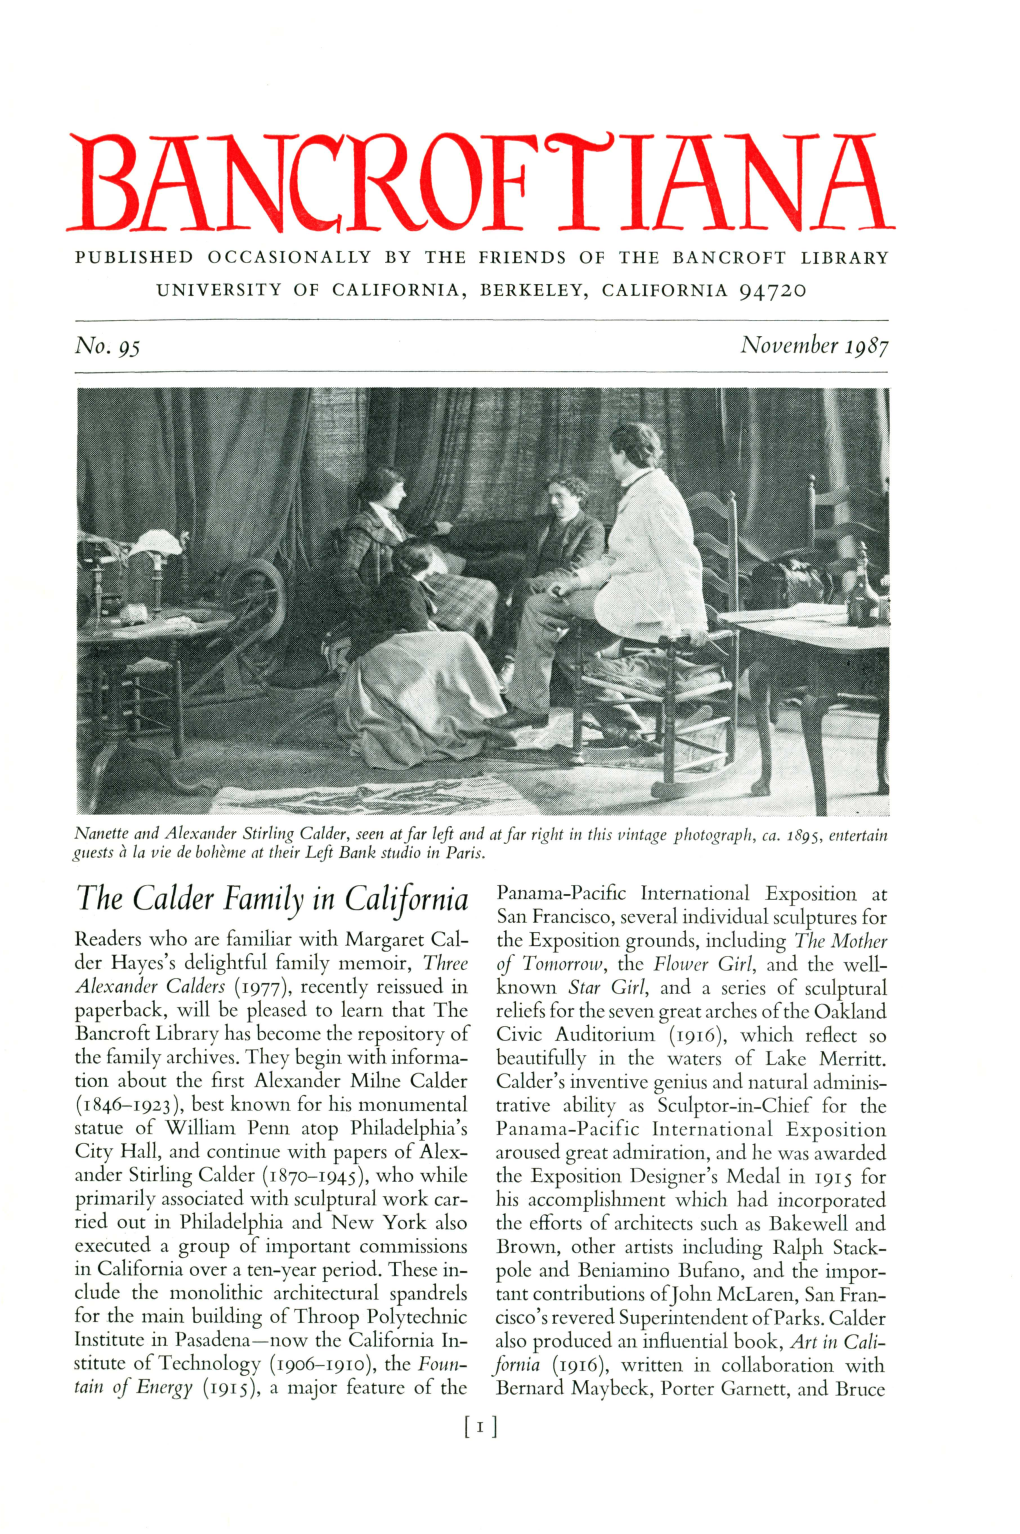 Published Occasionally by the Friends of the Bancroft Library University of California, Berkeley, California 94720